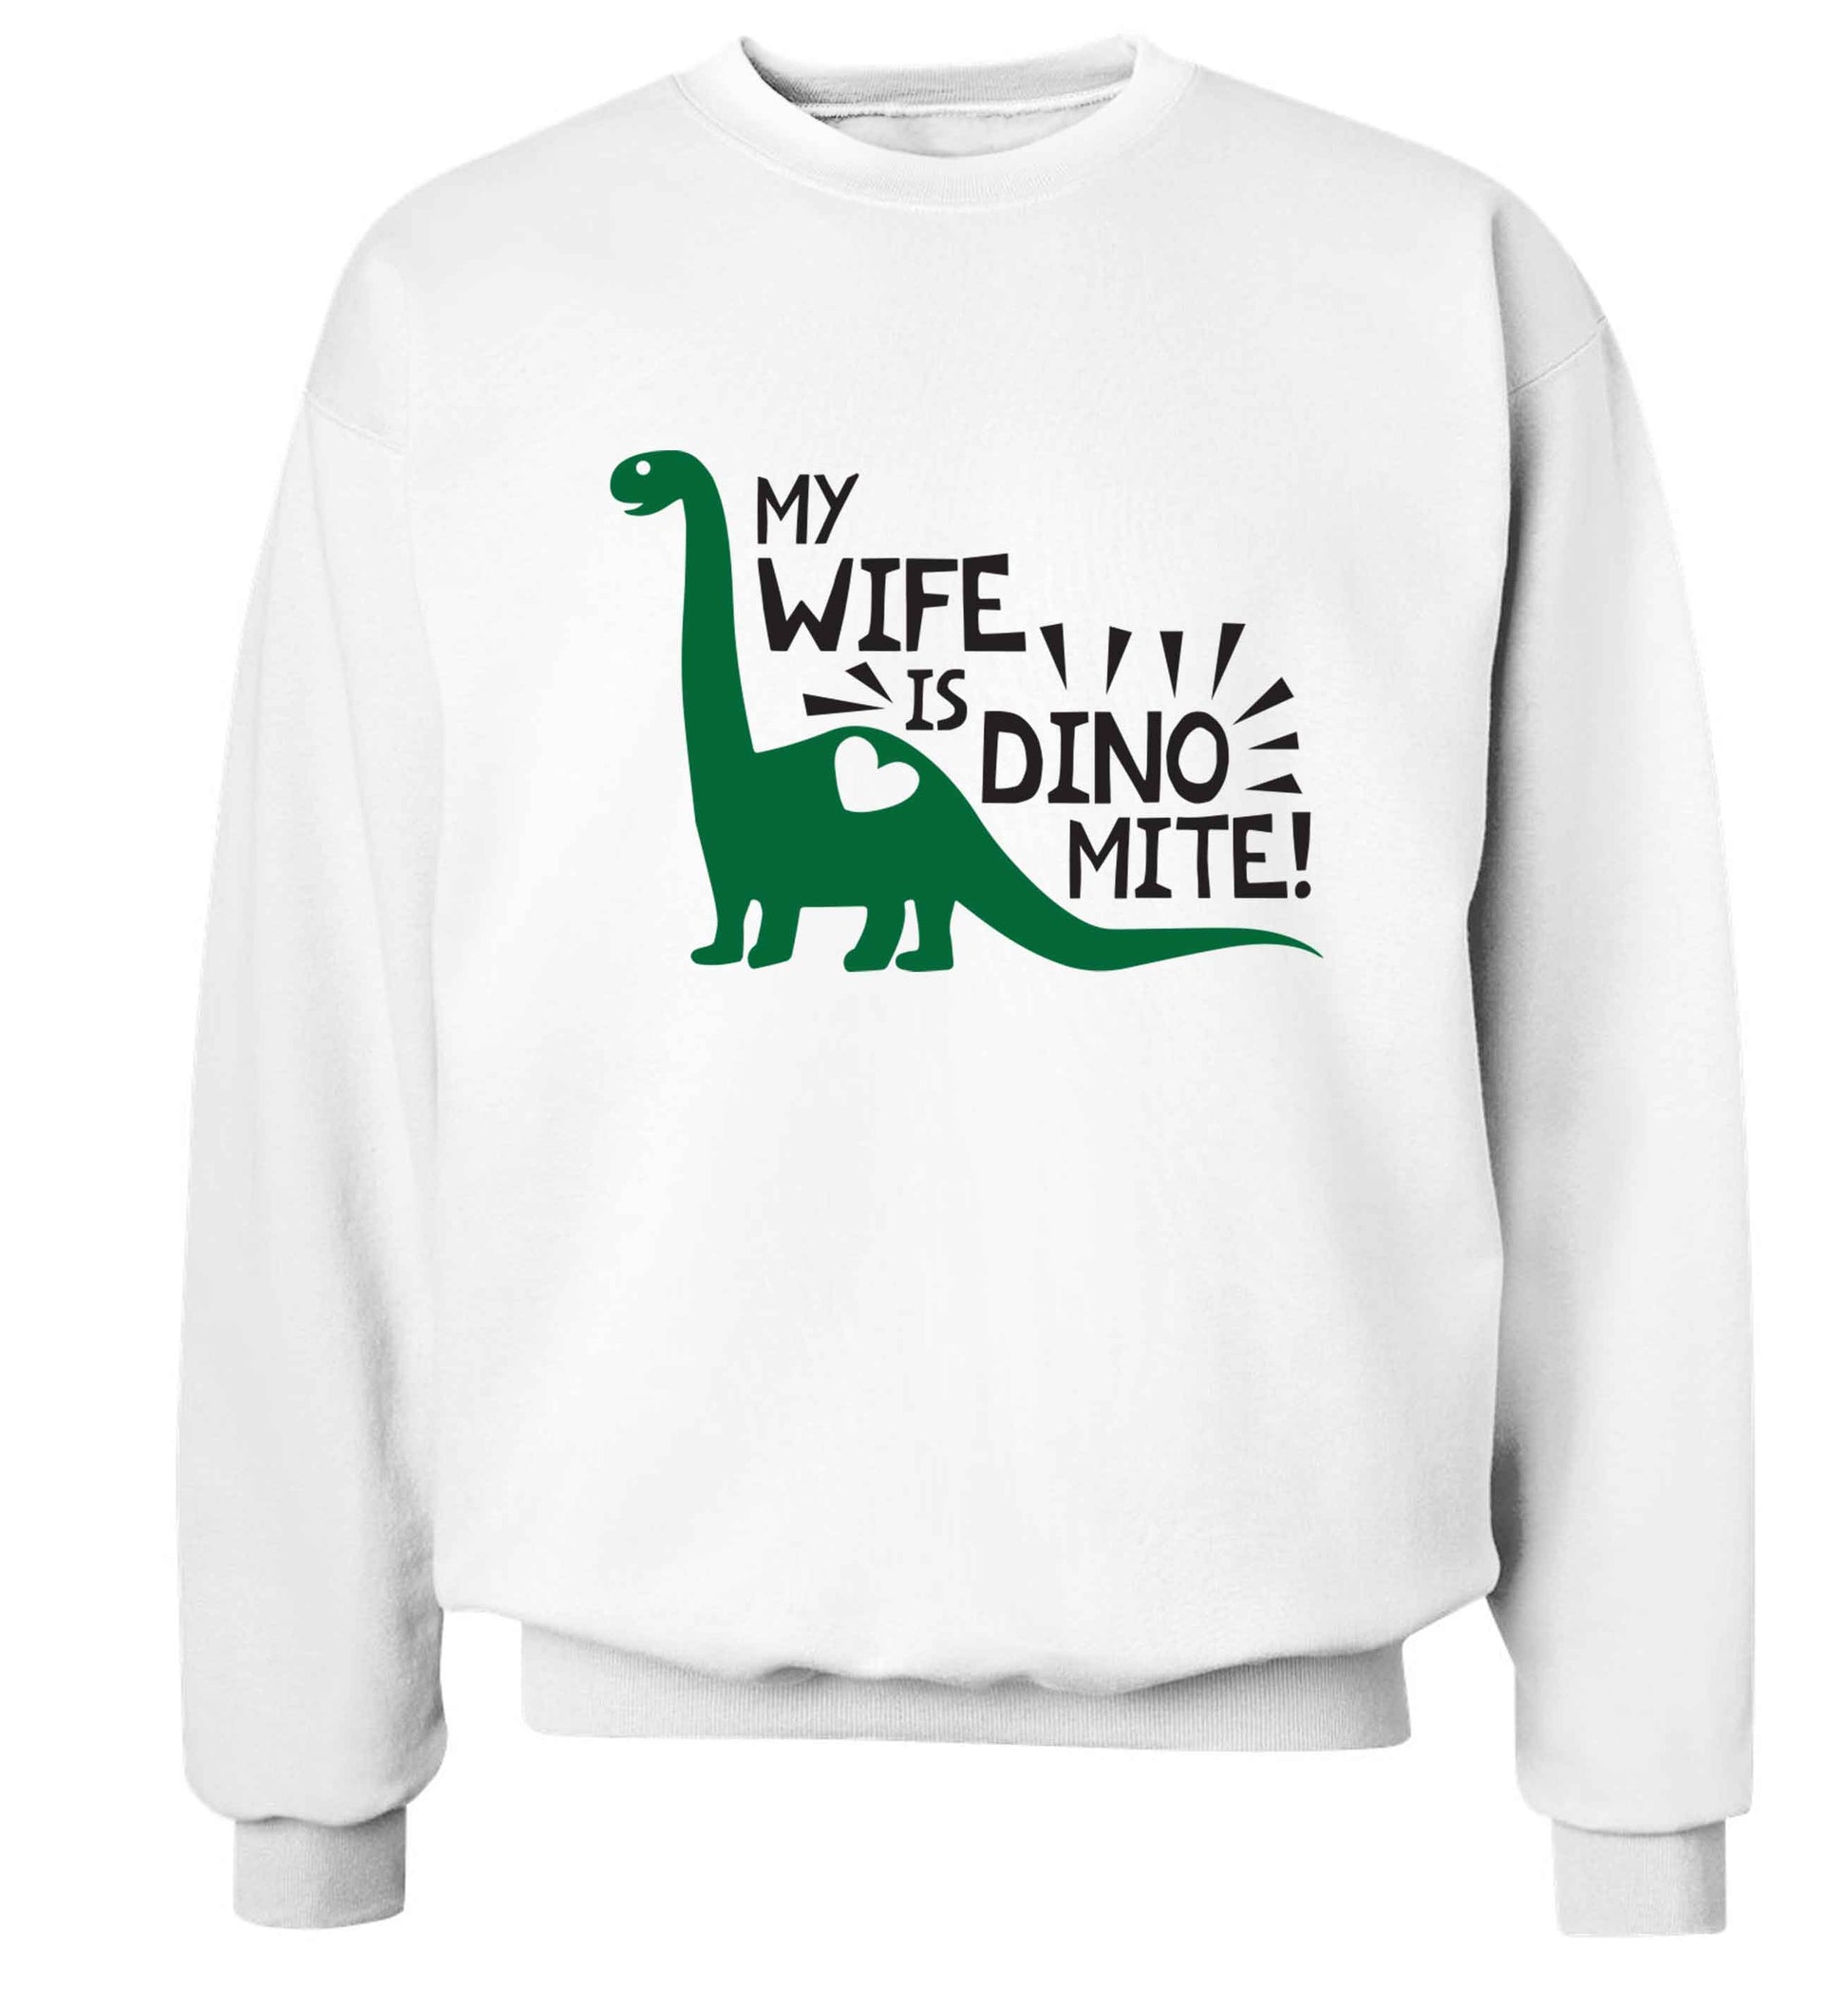 My wife is dinomite! Adult's unisex white Sweater 2XL